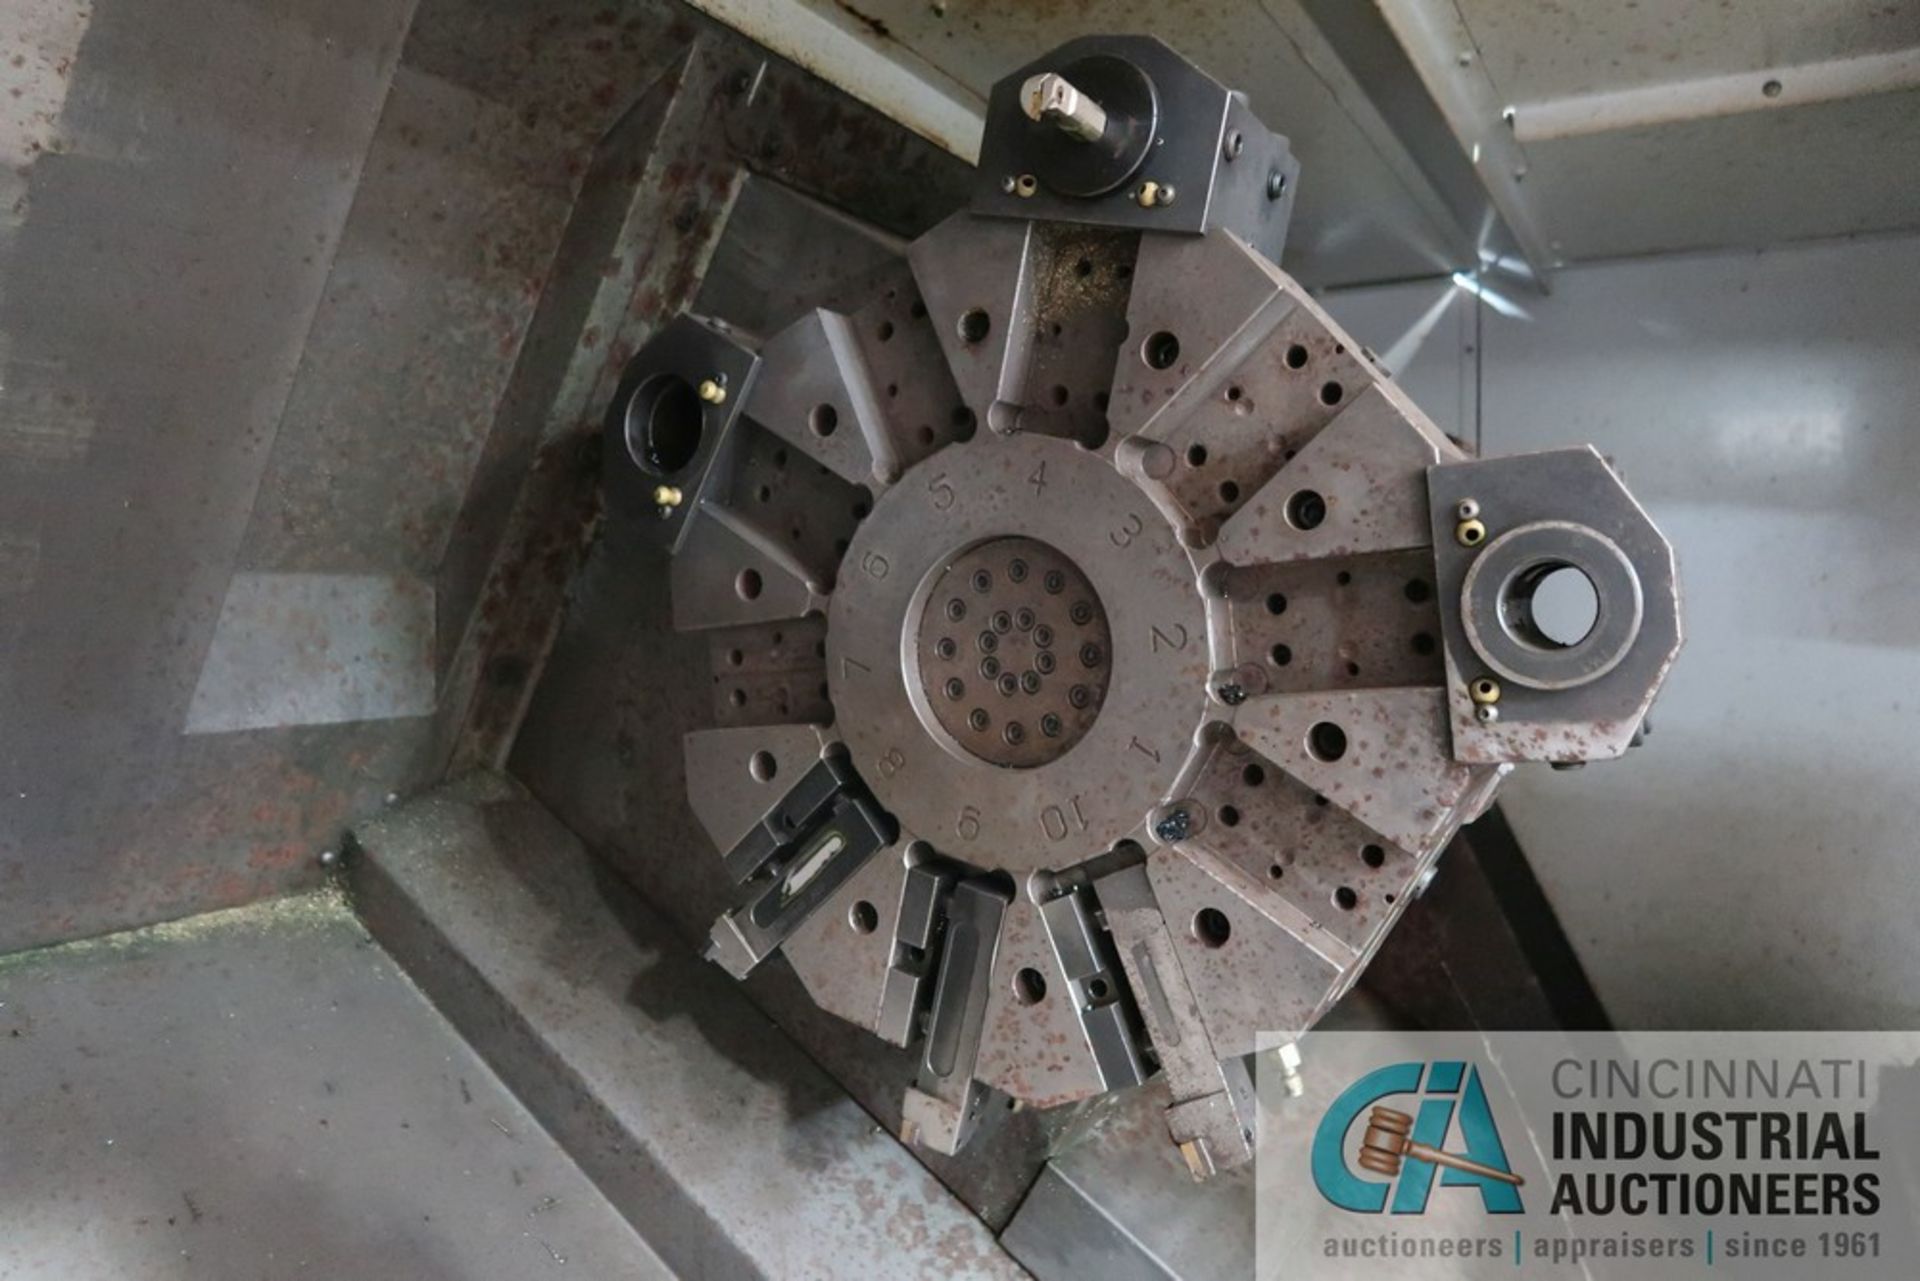 HAAS MODEL SL40 CNC TURNING CENTER; S/N 3082056, 20" 4-JAW CHUCK, 10-POSITION TURRET, TAILSTOCK, - Image 6 of 13